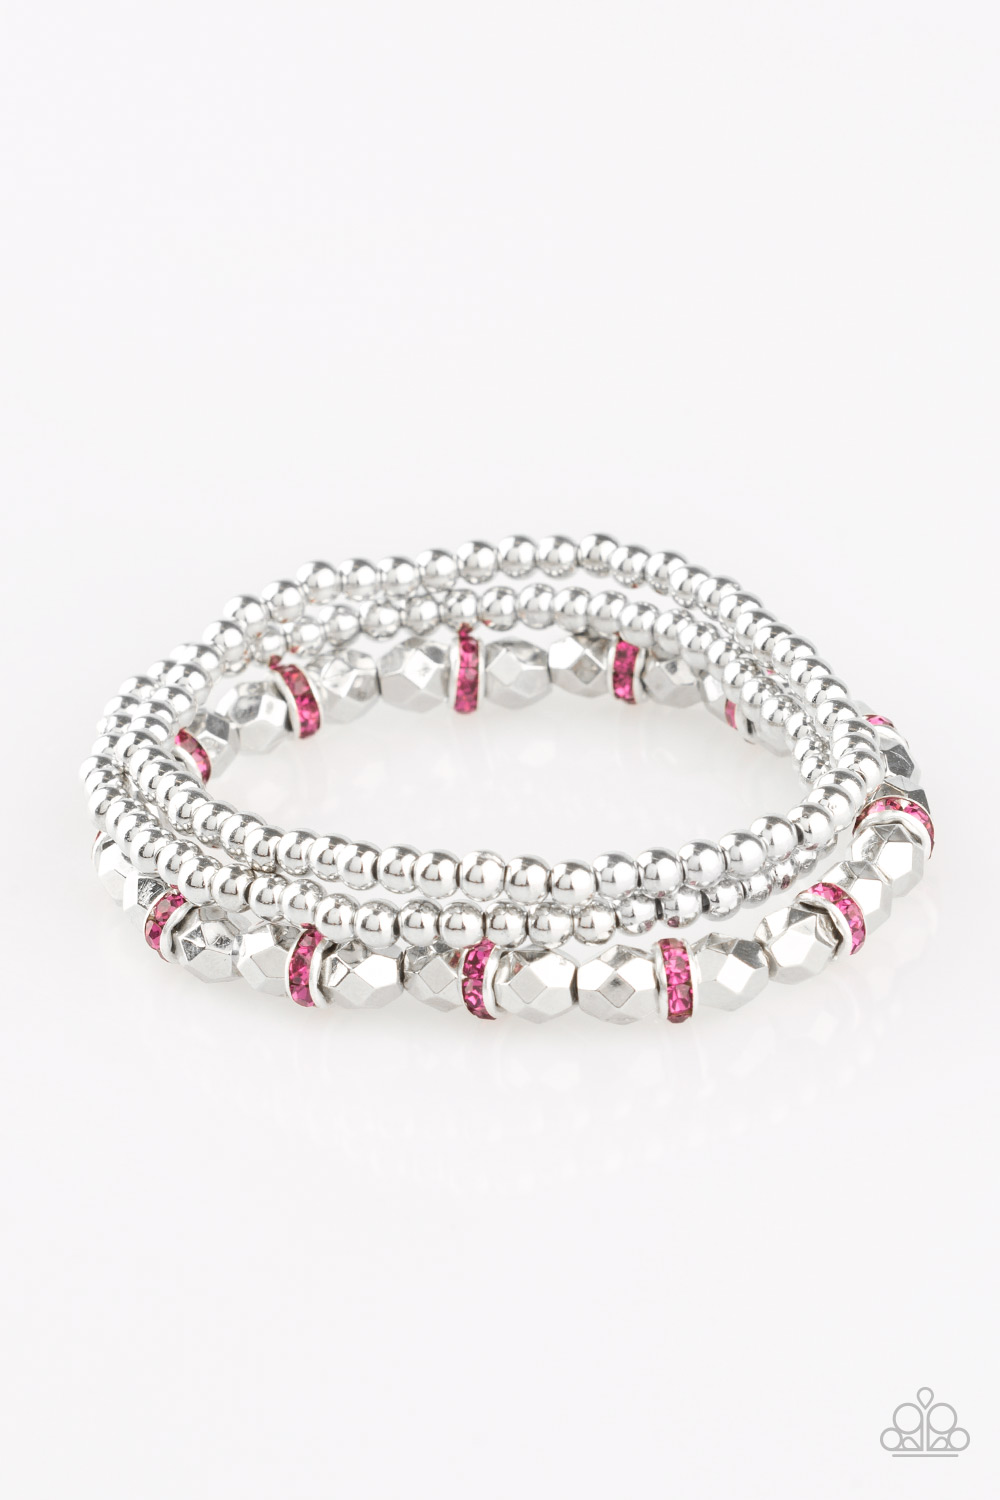 Paparazzi Accessories: Let There BEAM Light - Pink